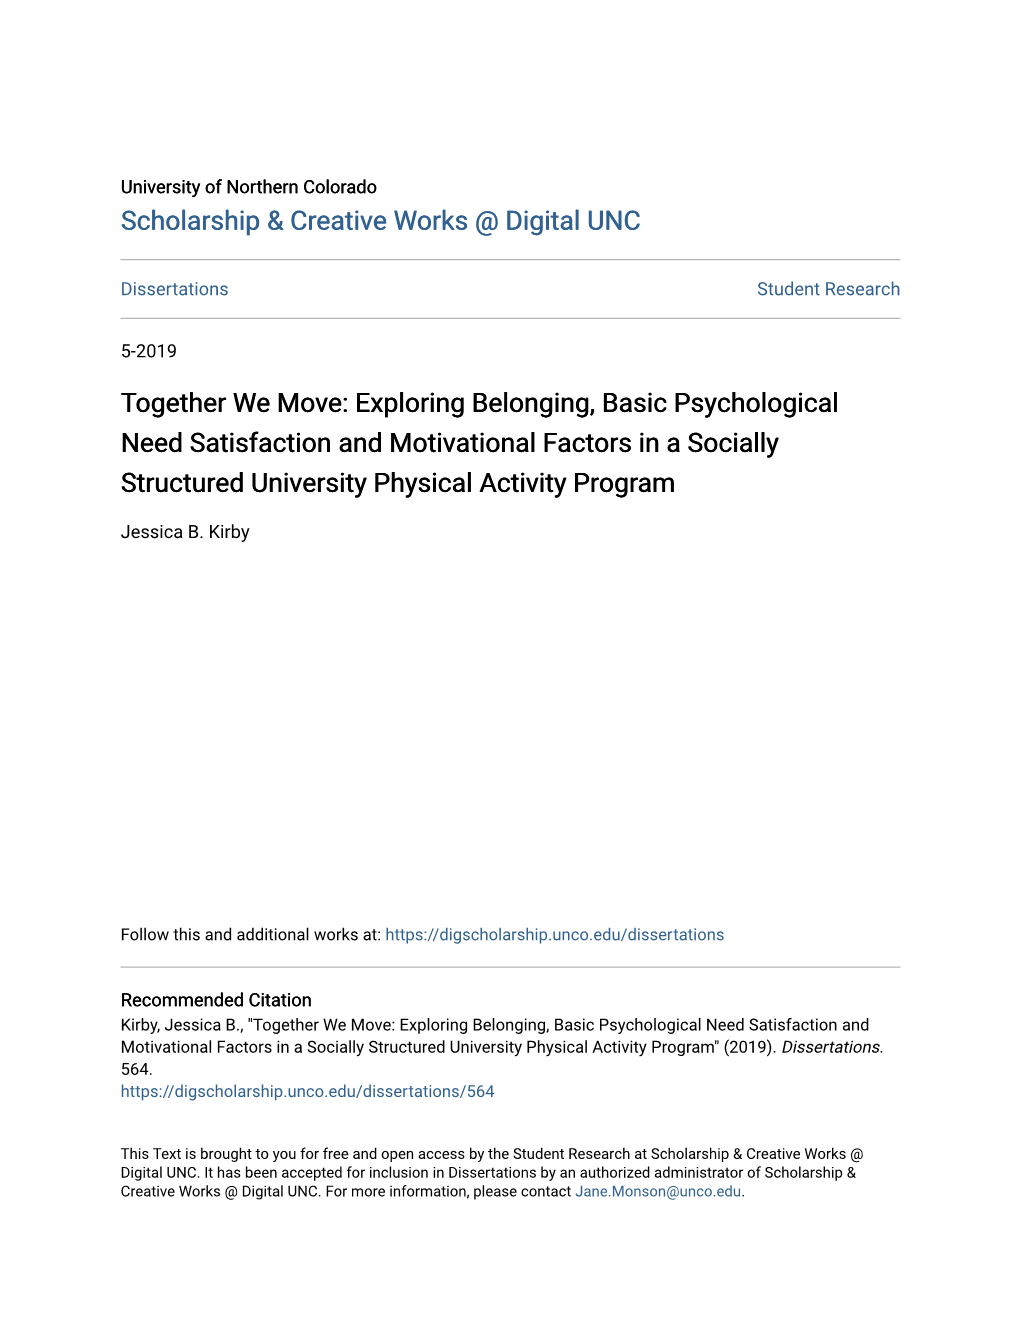 Together We Move: Exploring Belonging, Basic Psychological Need Satisfaction and Motivational Factors in a Socially Structured University Physical Activity Program